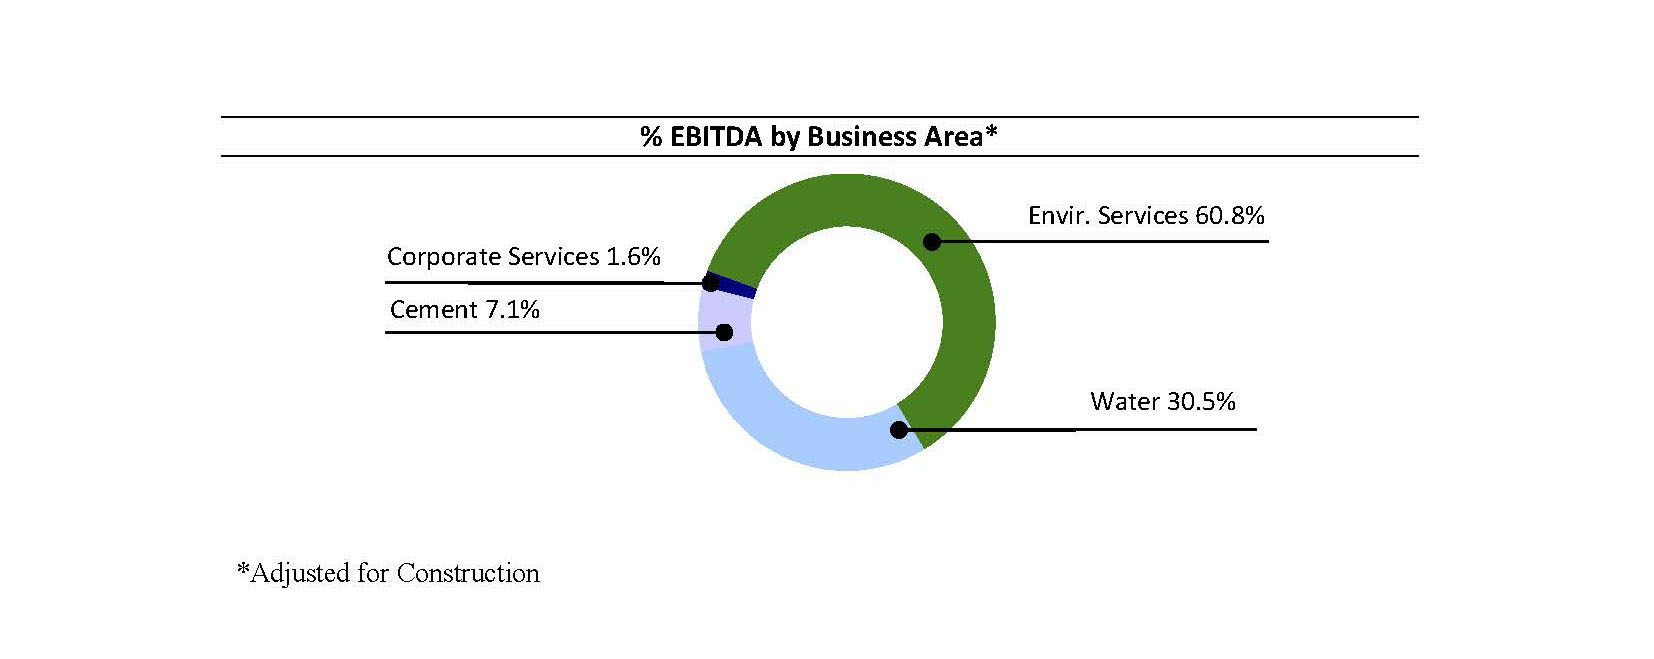 EBITDA by Business Area